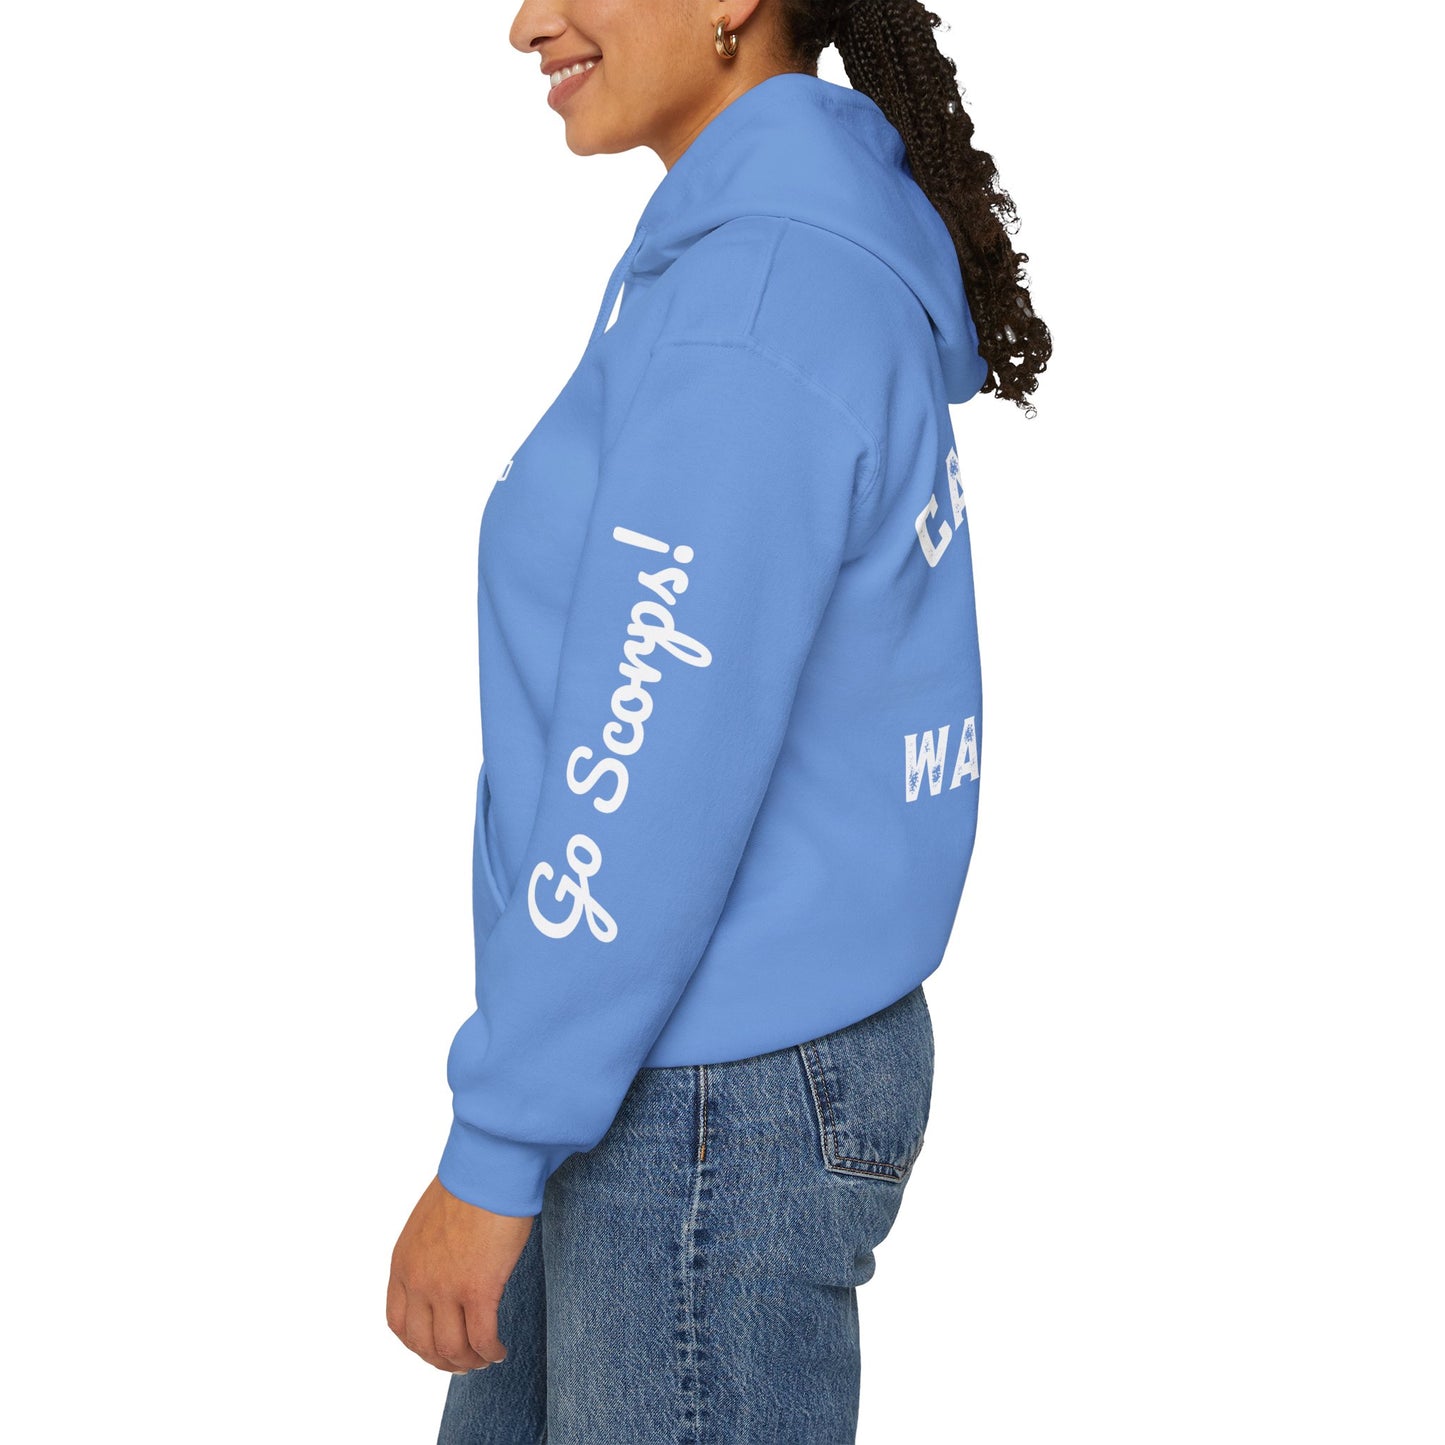 Nannette Camarillo Waterpolo Hoodies - CUSTOMIZE any side - put in the notes of order